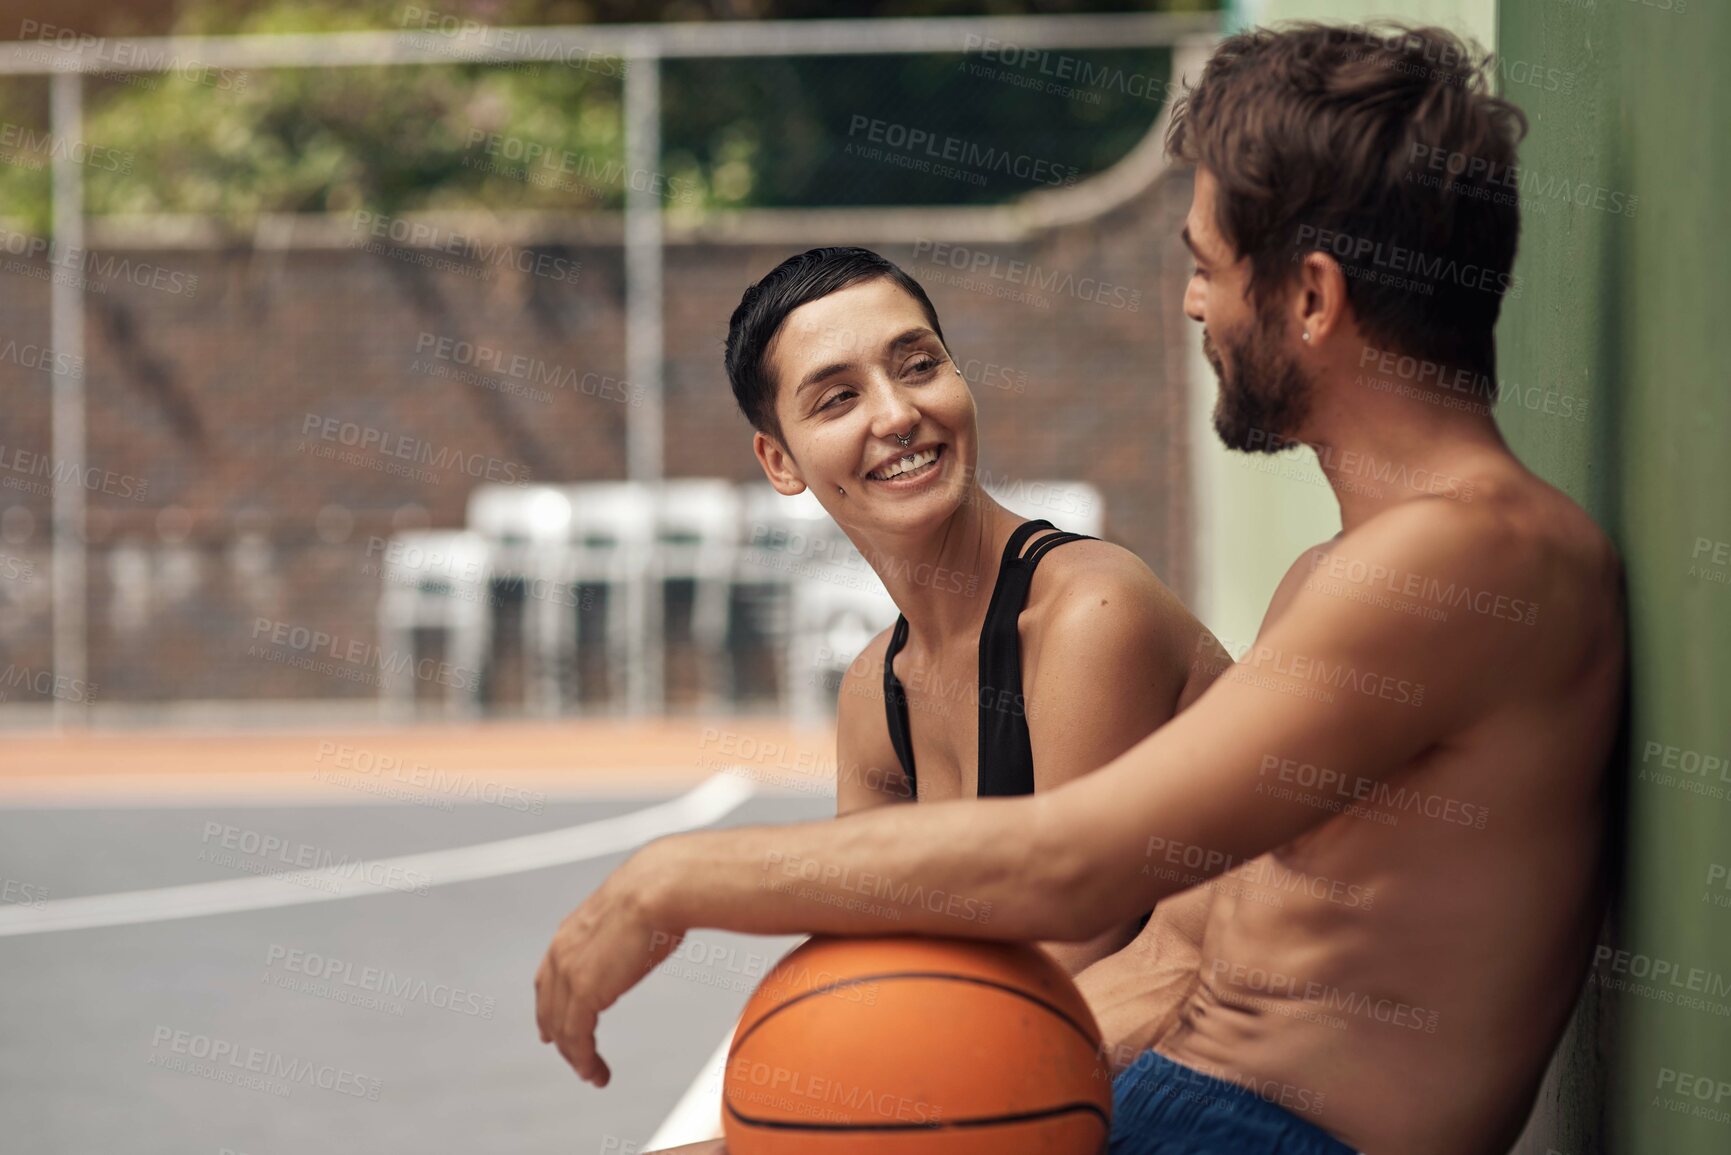 Buy stock photo Shot of two sporty young people taking a break after a game of basketball